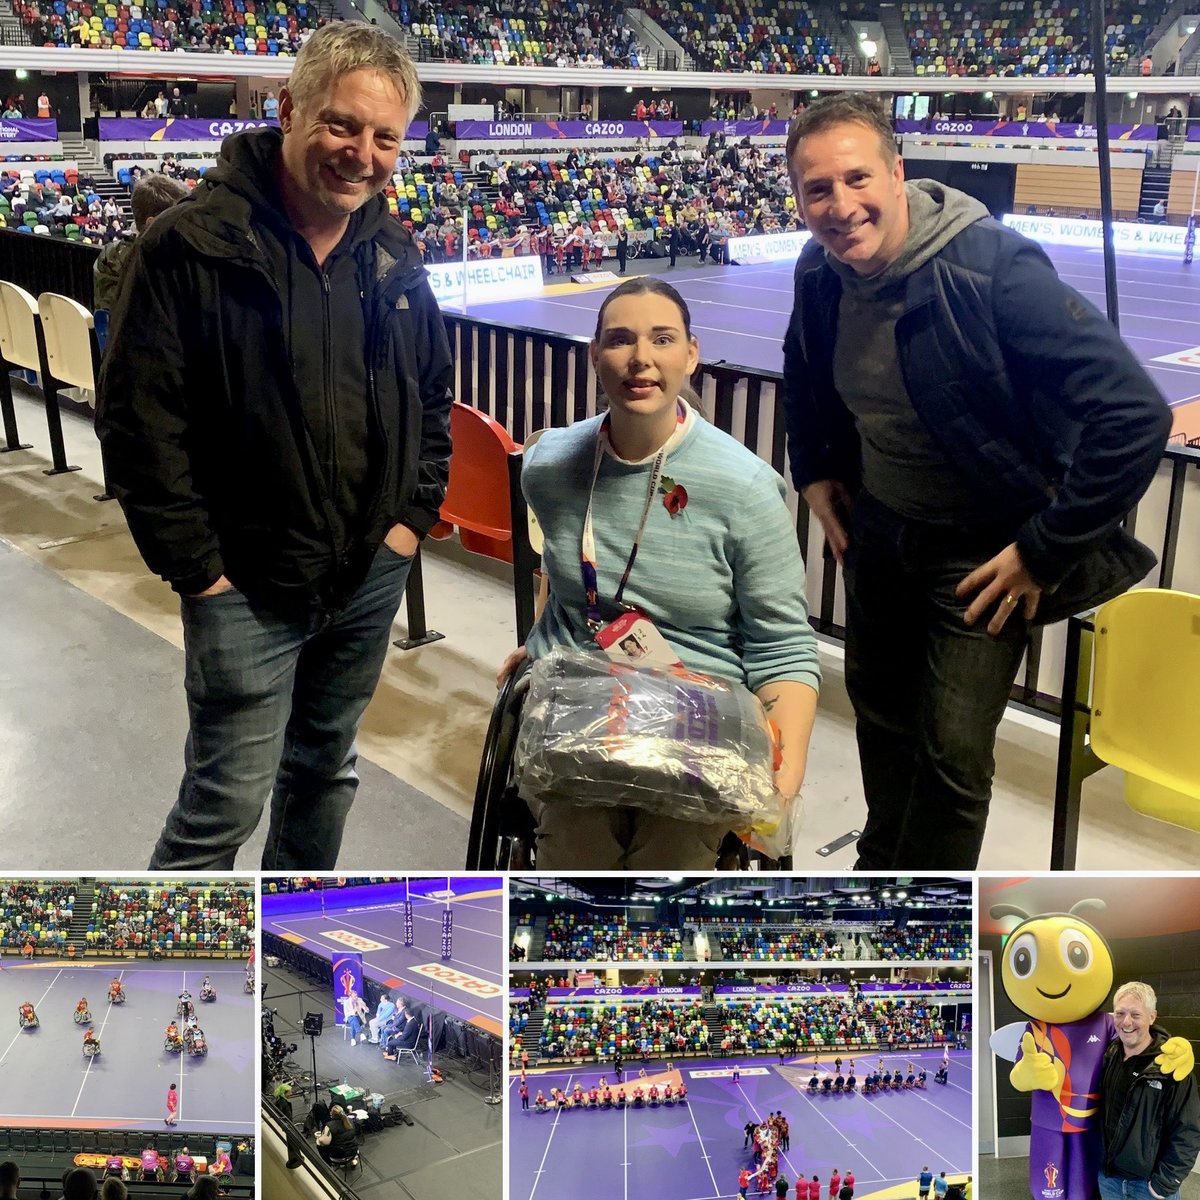 At The Copper Box watching the brilliant @RLWC2021 with the truly inspirational @BBCSport commentator @FreyaLevy along with @AndySutherden.

#OneGameTogether

@1kevincampbell @AshMindSet @vanillaweb @mark_parrin @SpeakUpAtWork @johno_67 @GencoCS @Synecore @pushbikeb2b @NAVEXInc